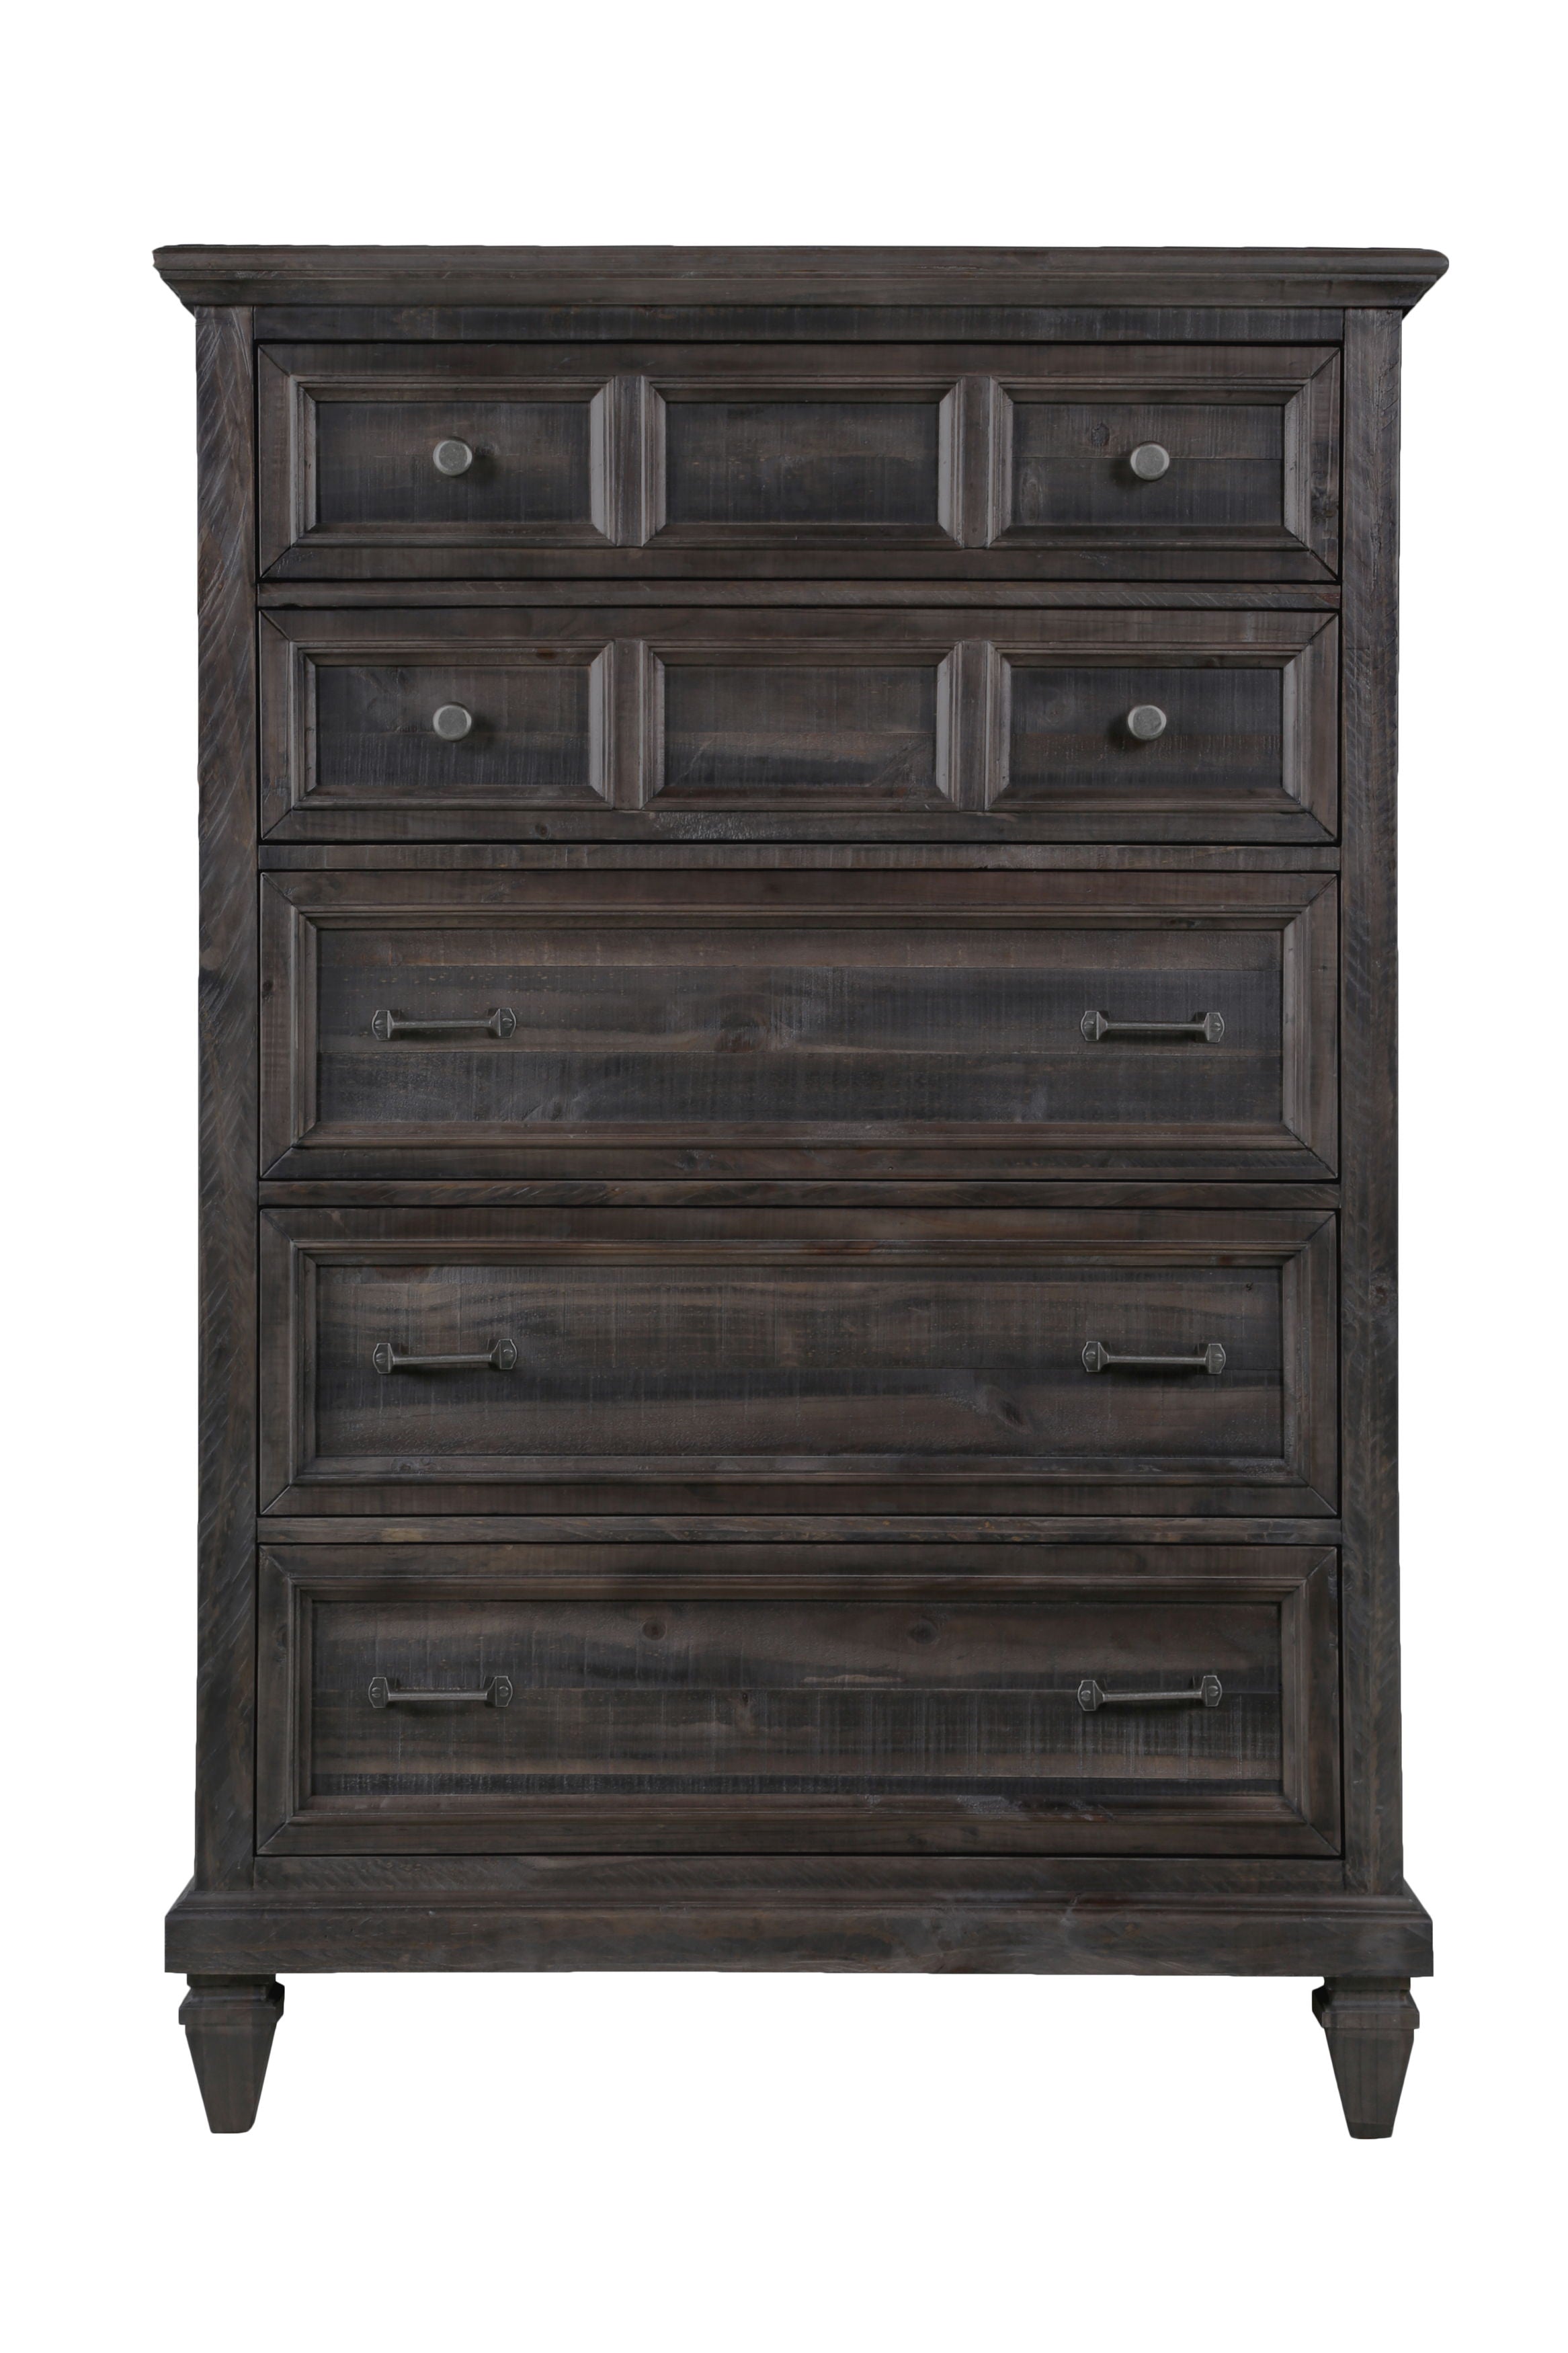 Calistoga - 5 Drawer Chest In Weathered Charcoal - Weathered Charcoal